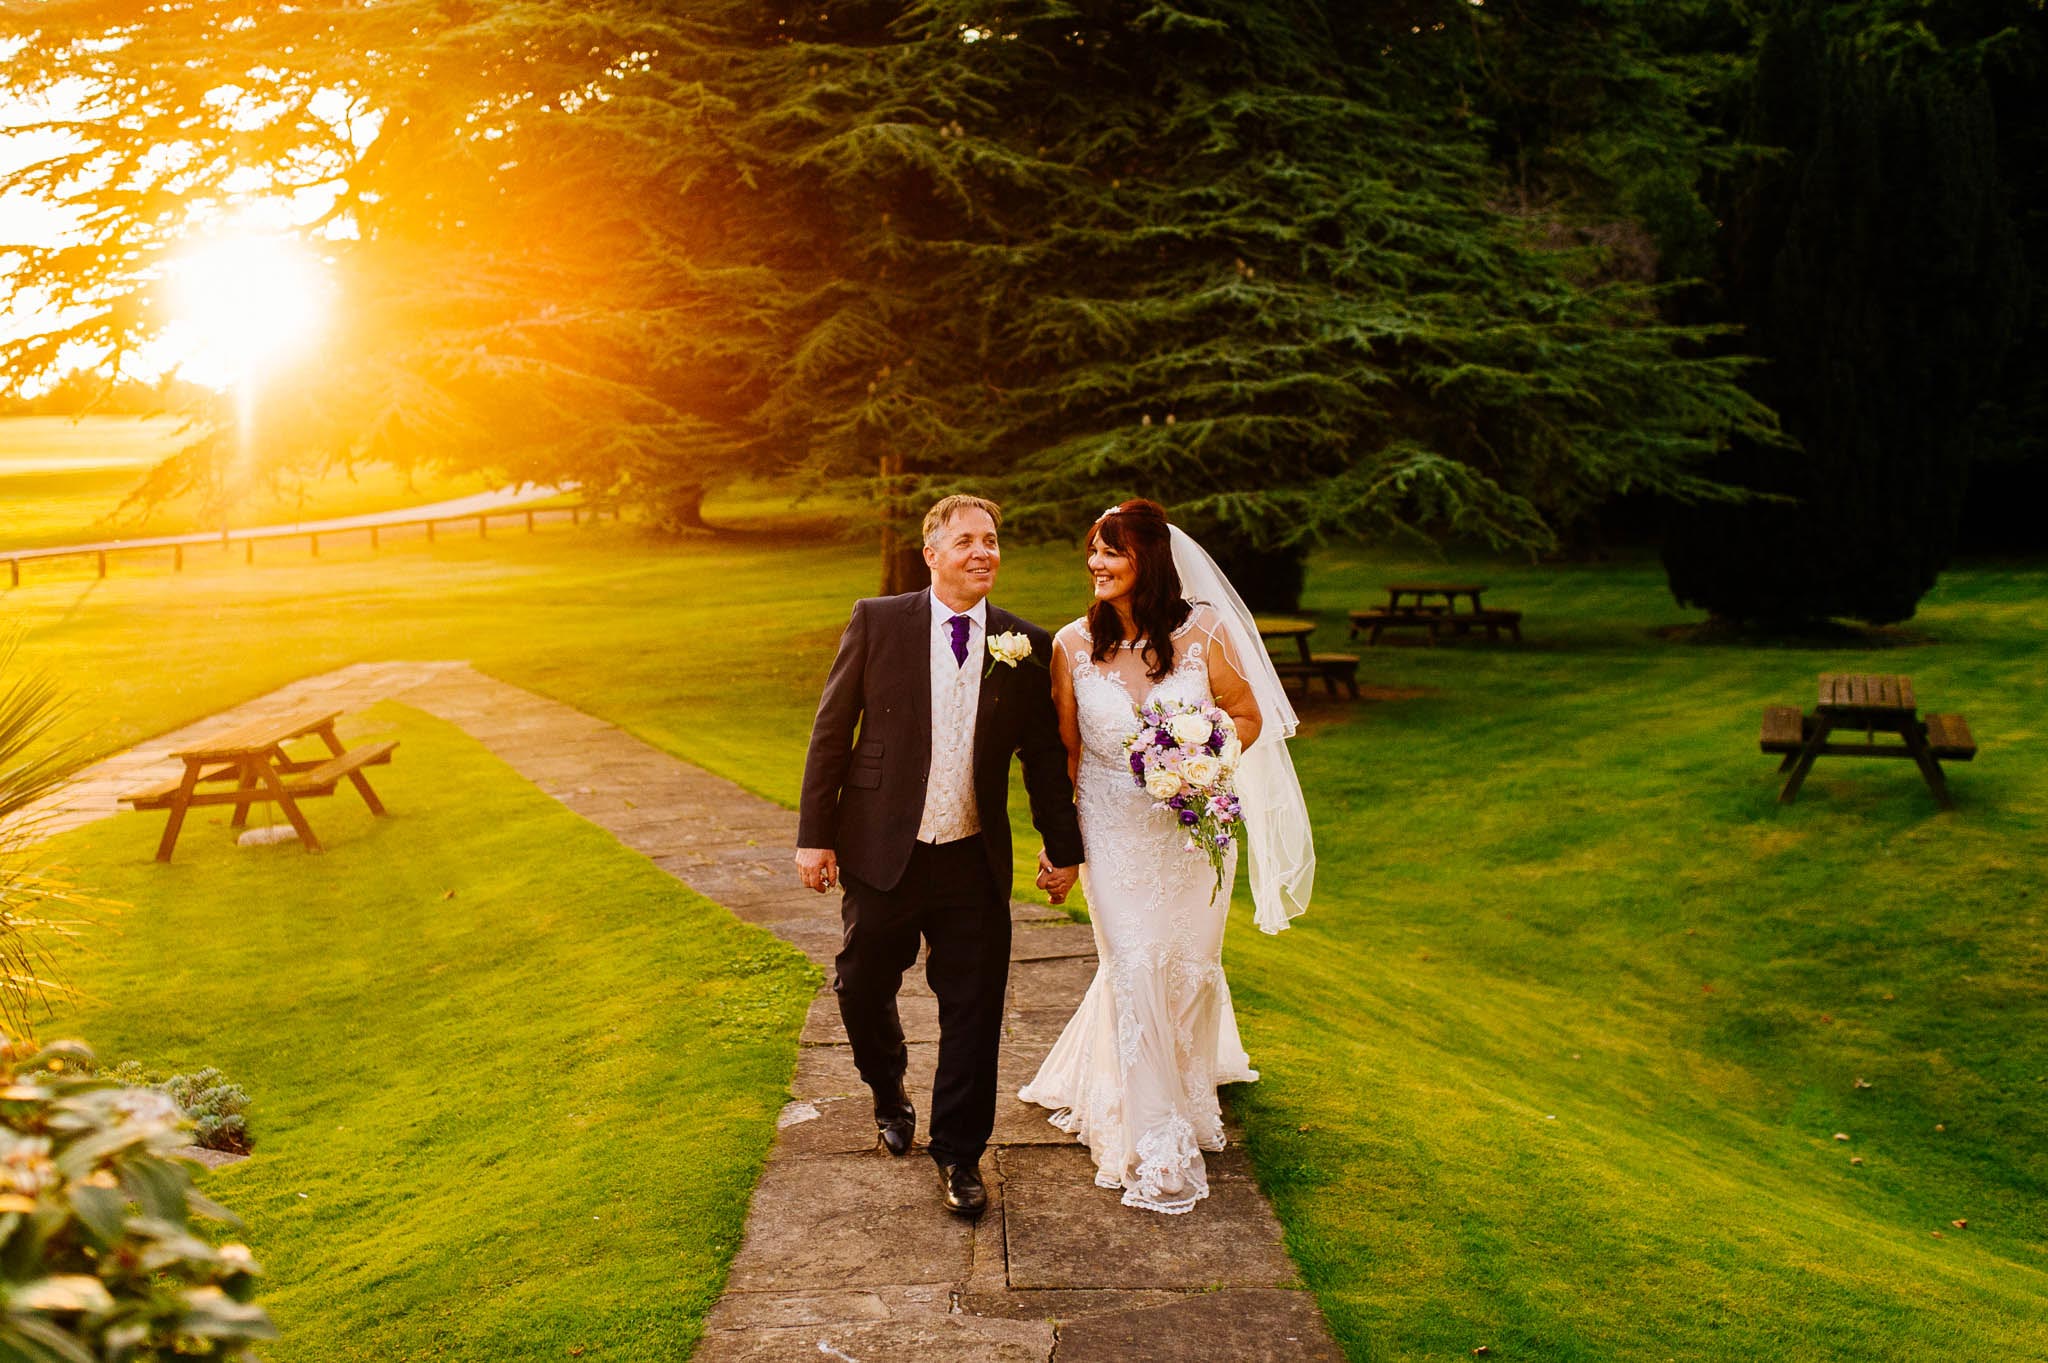 Gail & Gary’s wedding at Owston Hall in Doncaster